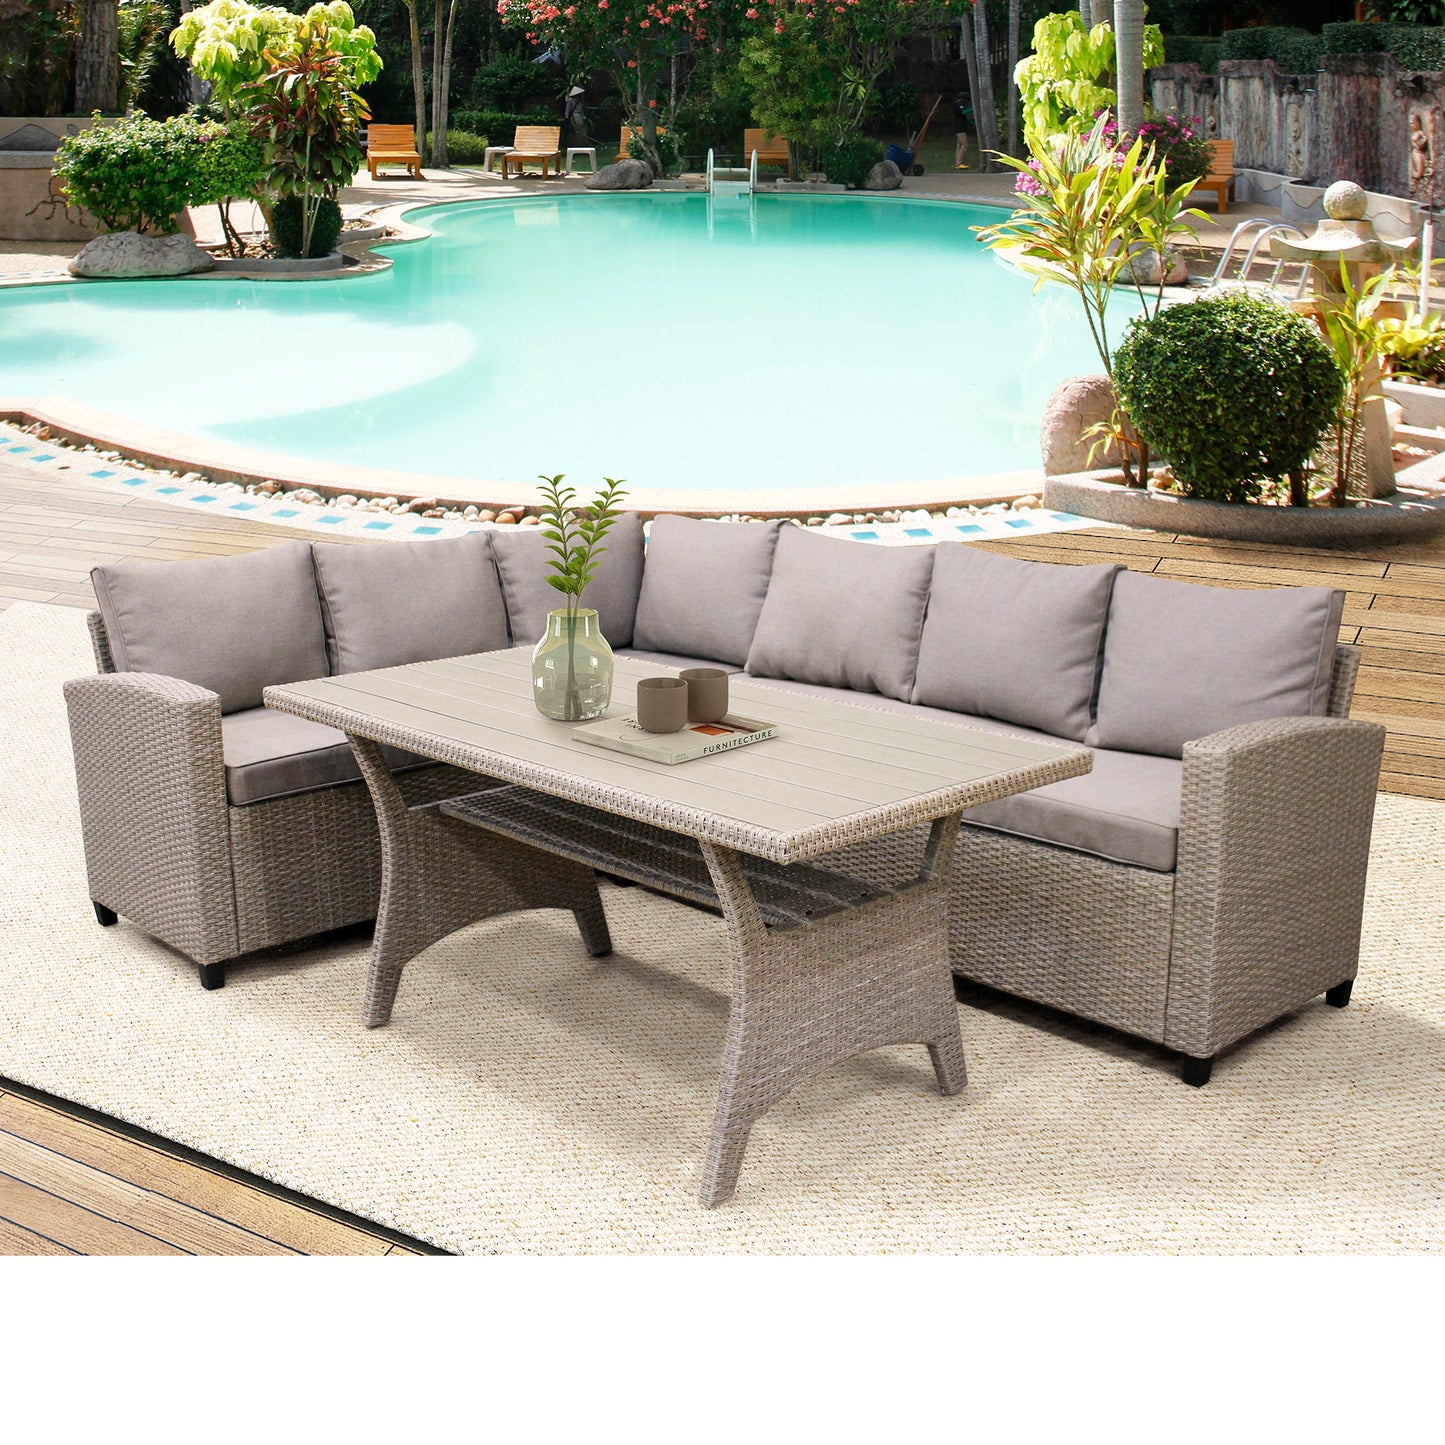 3 Piece Patio Conversation Sets, All-Weather Wicker Outdoor Furniture Sectional Sofa Couch Dining Set with Table, Seat Cushions, Pillows for Garden, Lawn, Backyard, Front Porch, Brown